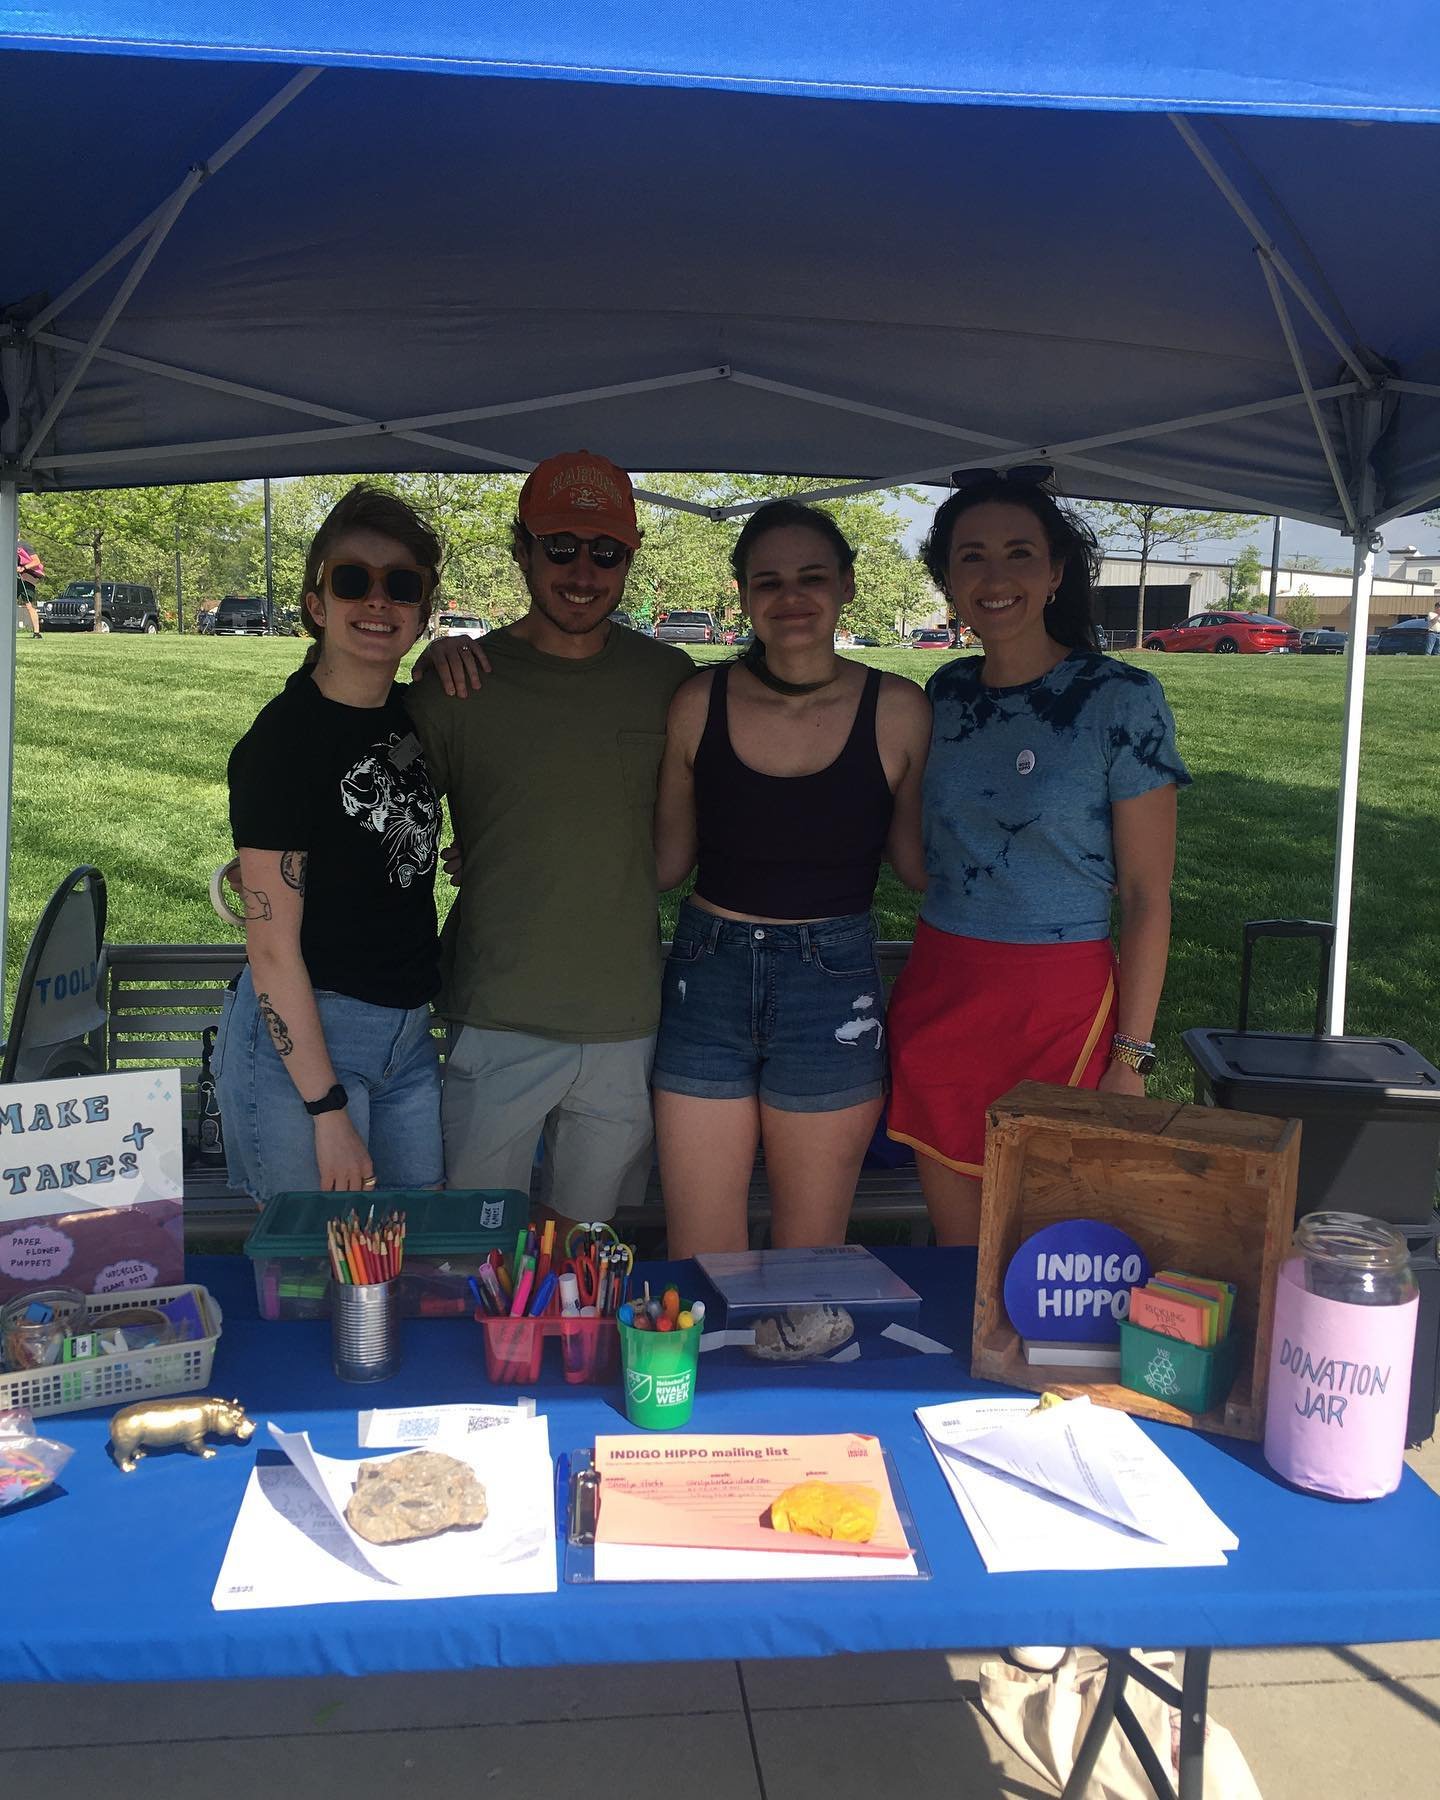 Our team is all set up with the @cincycac at the Cincinnati Earth Day Coalition&rsquo;s Earth Day event at @summitparkblueash today! Stop by our booth from 11-5 for some creative reuse crafting fun! 🌎🌀

And, our shop is own normal hours from 12-6 t